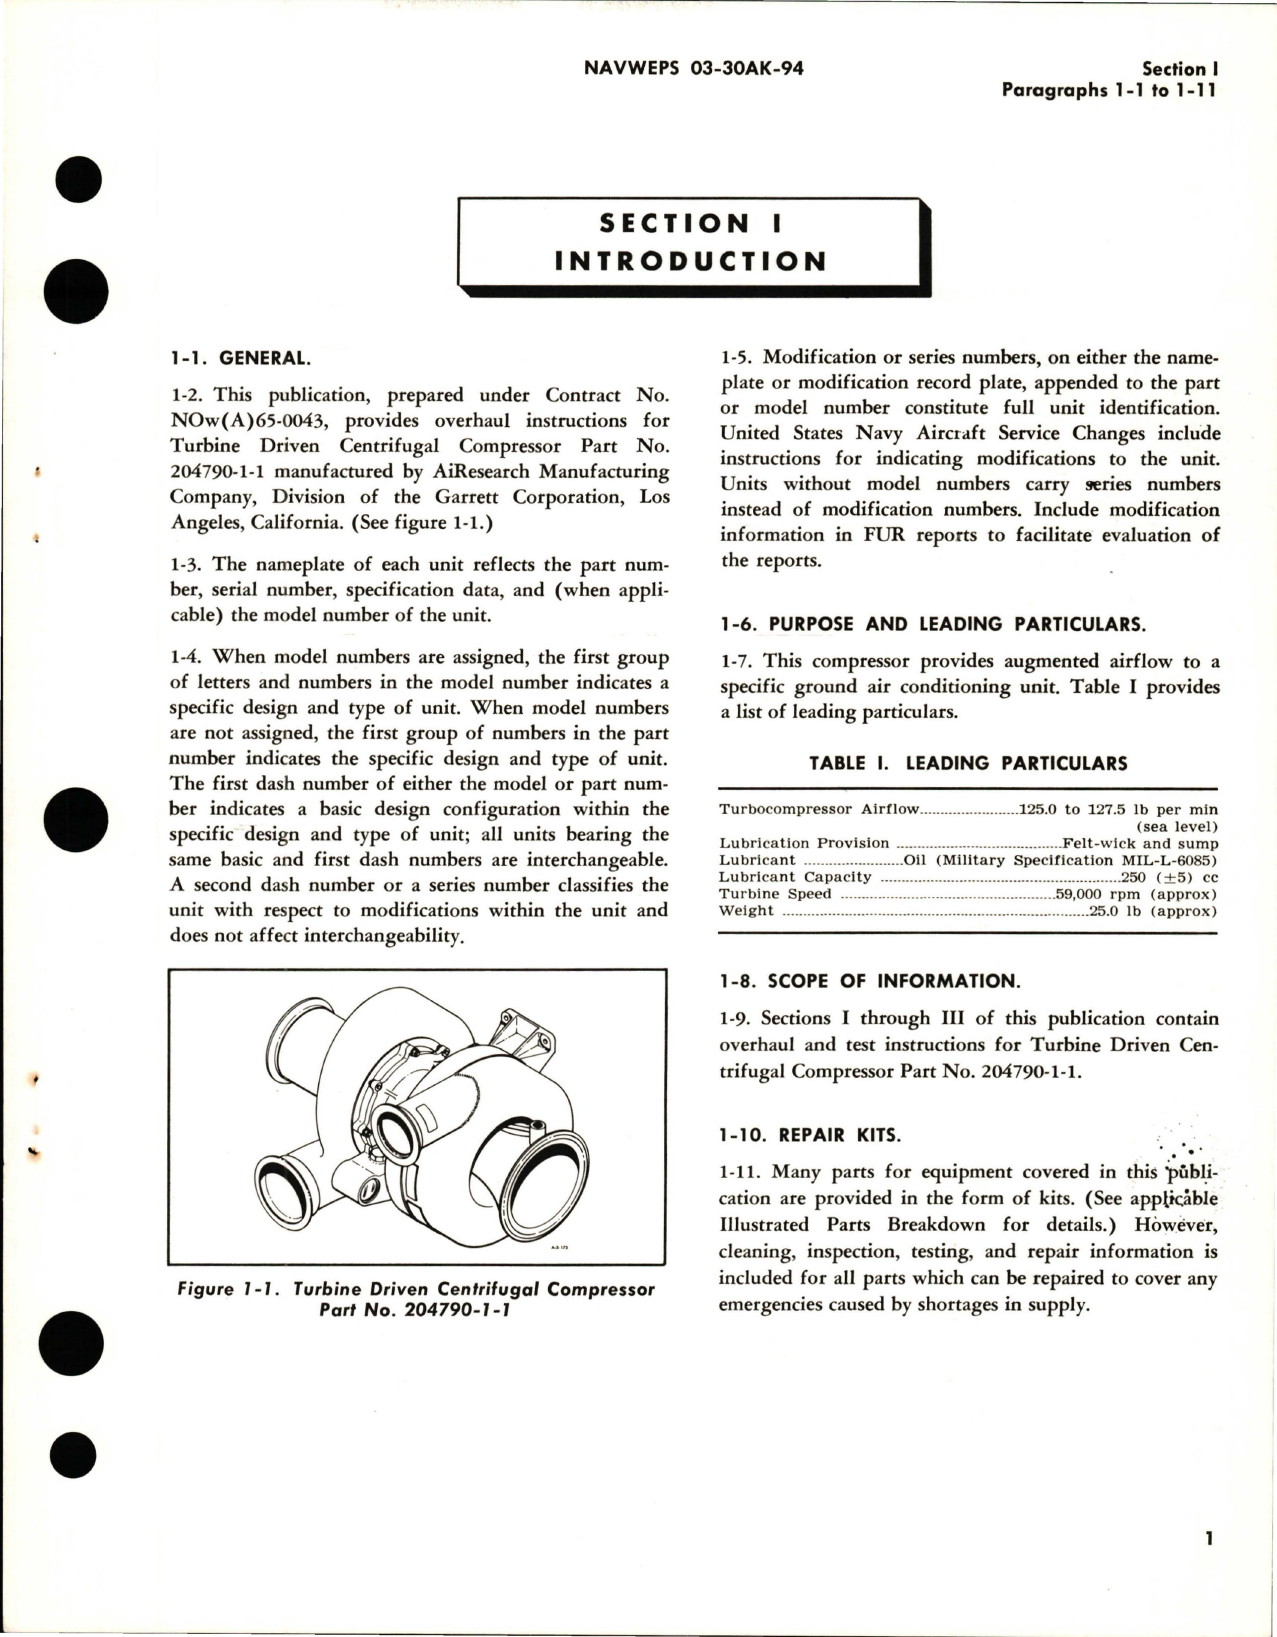 Sample page 5 from AirCorps Library document: Overhaul Instructions for Turbine Driven Centrifugal Compressor - Part 204790-1-1